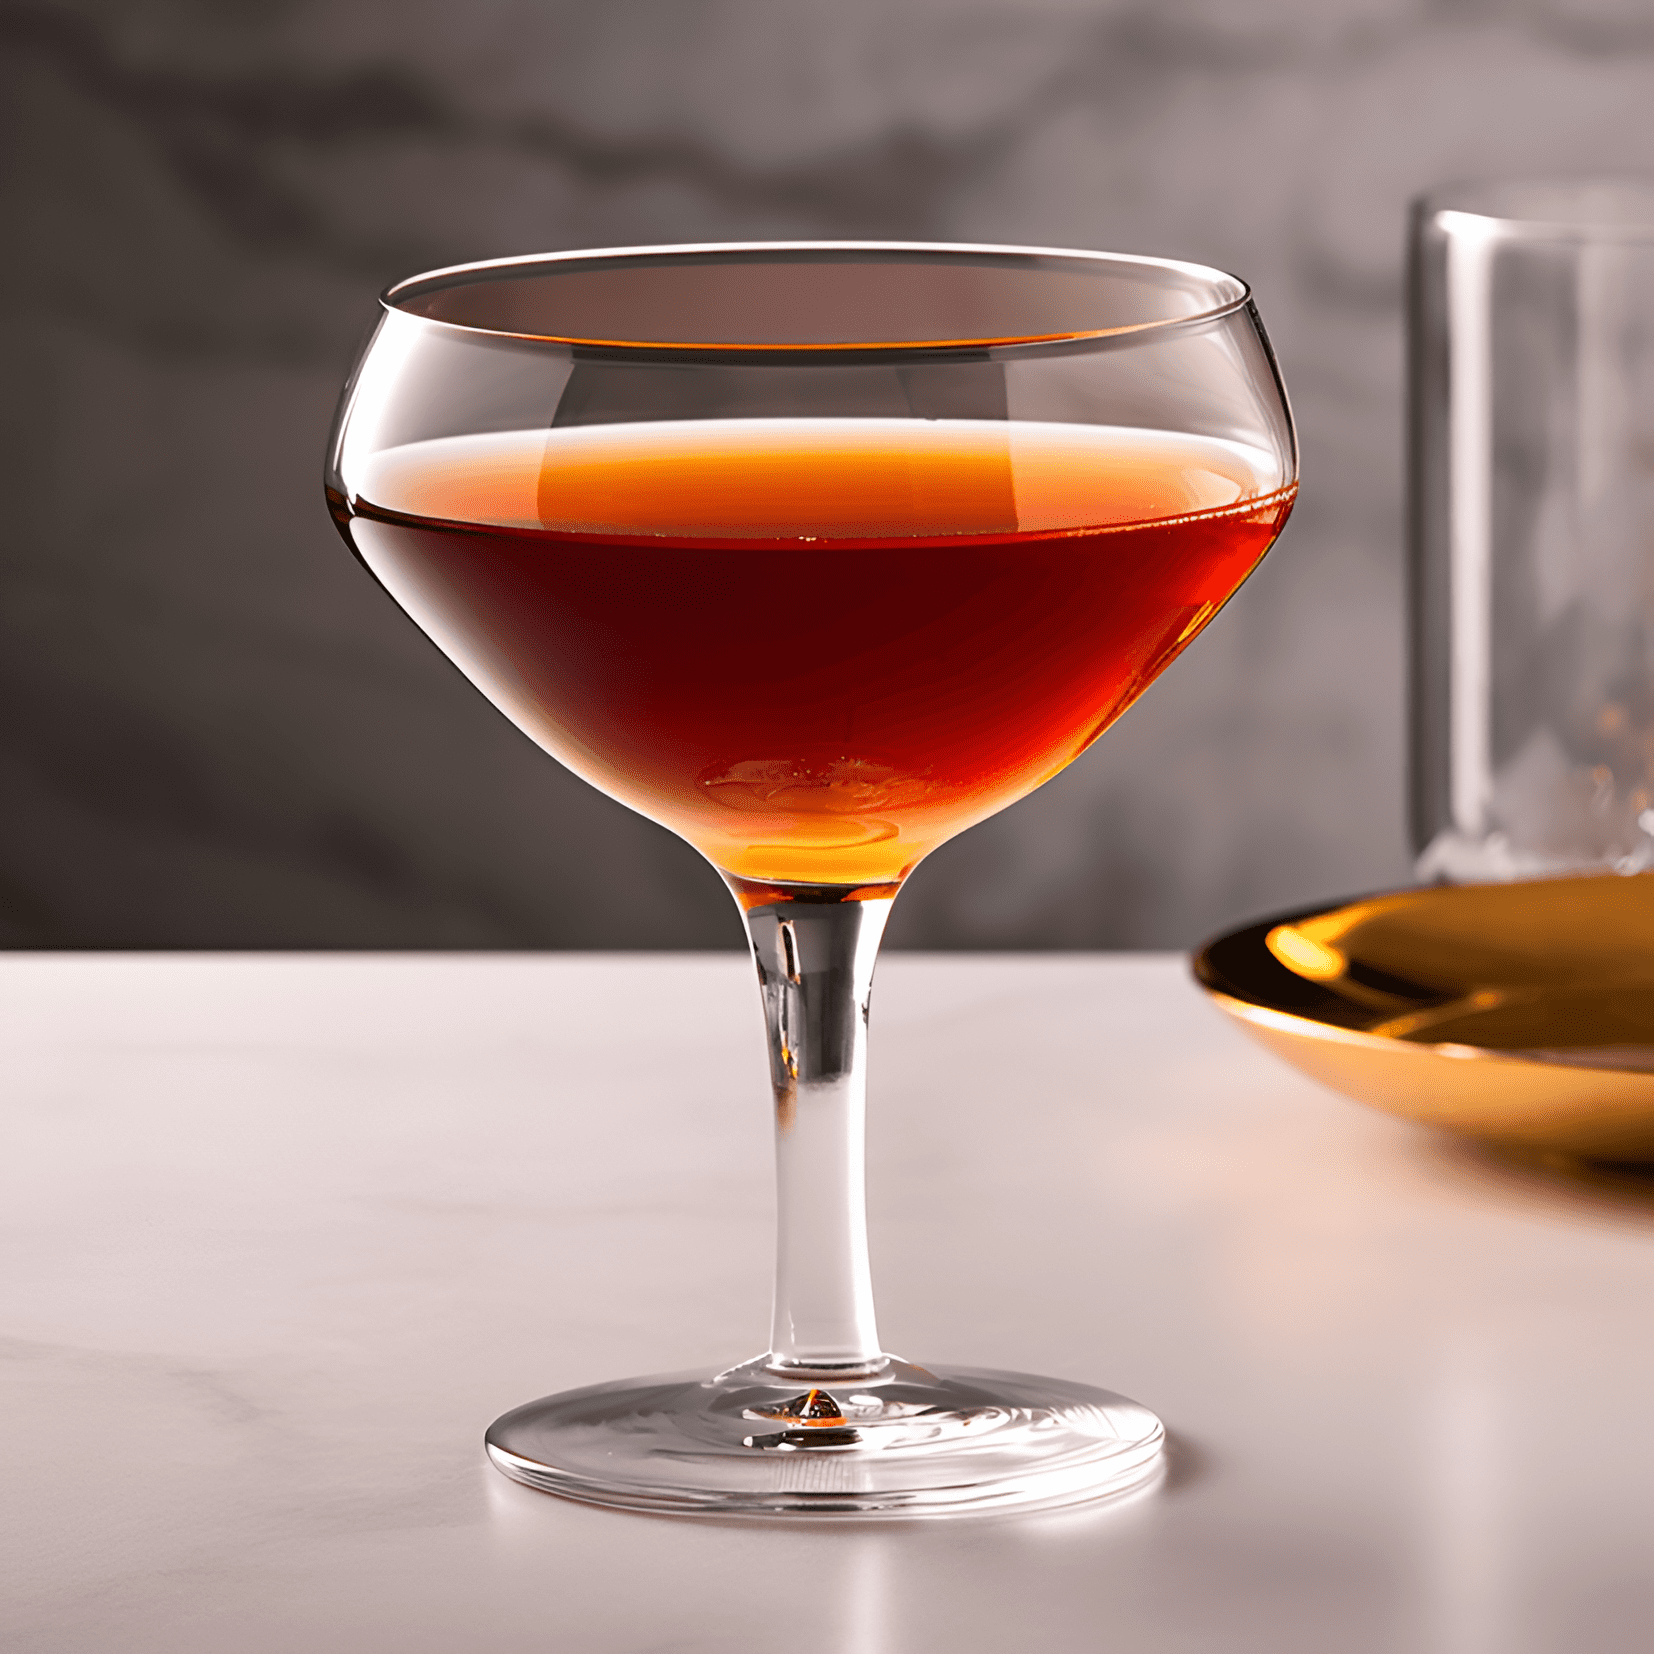 Porto Cocktail Recipe - The Porto cocktail is a rich, velvety, and luxurious drink with a perfect balance of sweet and sour flavors. The port wine adds a deep, fruity sweetness, while the brandy provides warmth and depth. The addition of egg yolk creates a creamy, smooth texture, and the nutmeg garnish adds a hint of spice.